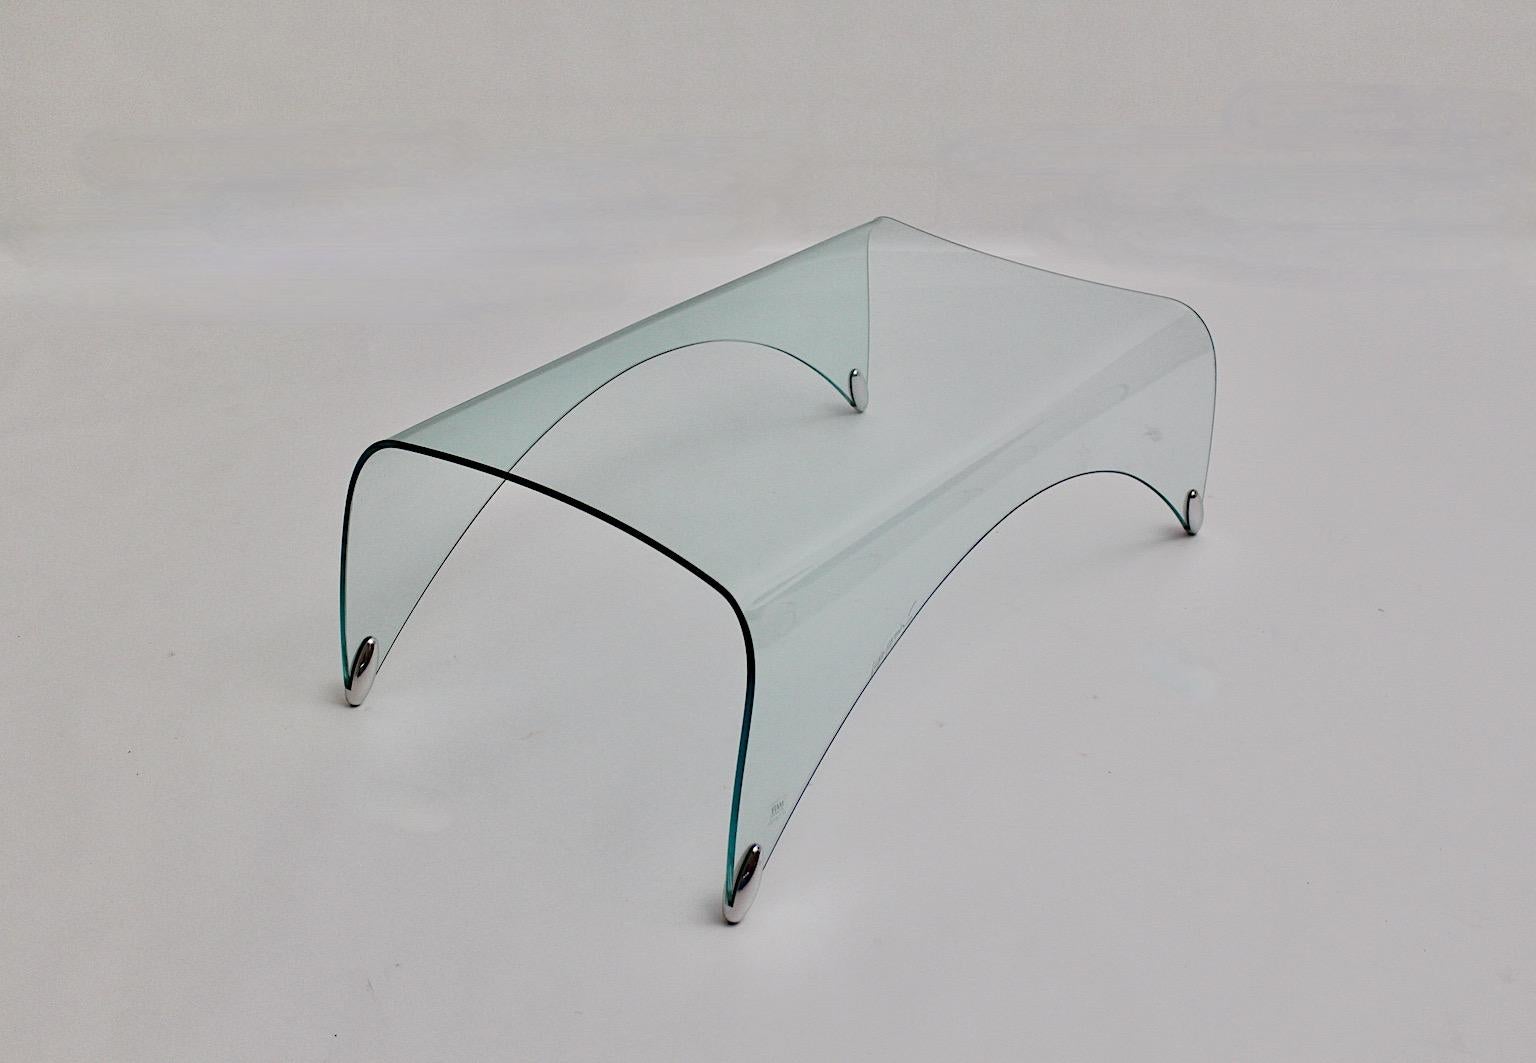 Modernist Vintage Organic Glass Sofa Table Massimo Iosa Ghini Fiam Italy 20th C In Good Condition For Sale In Vienna, AT